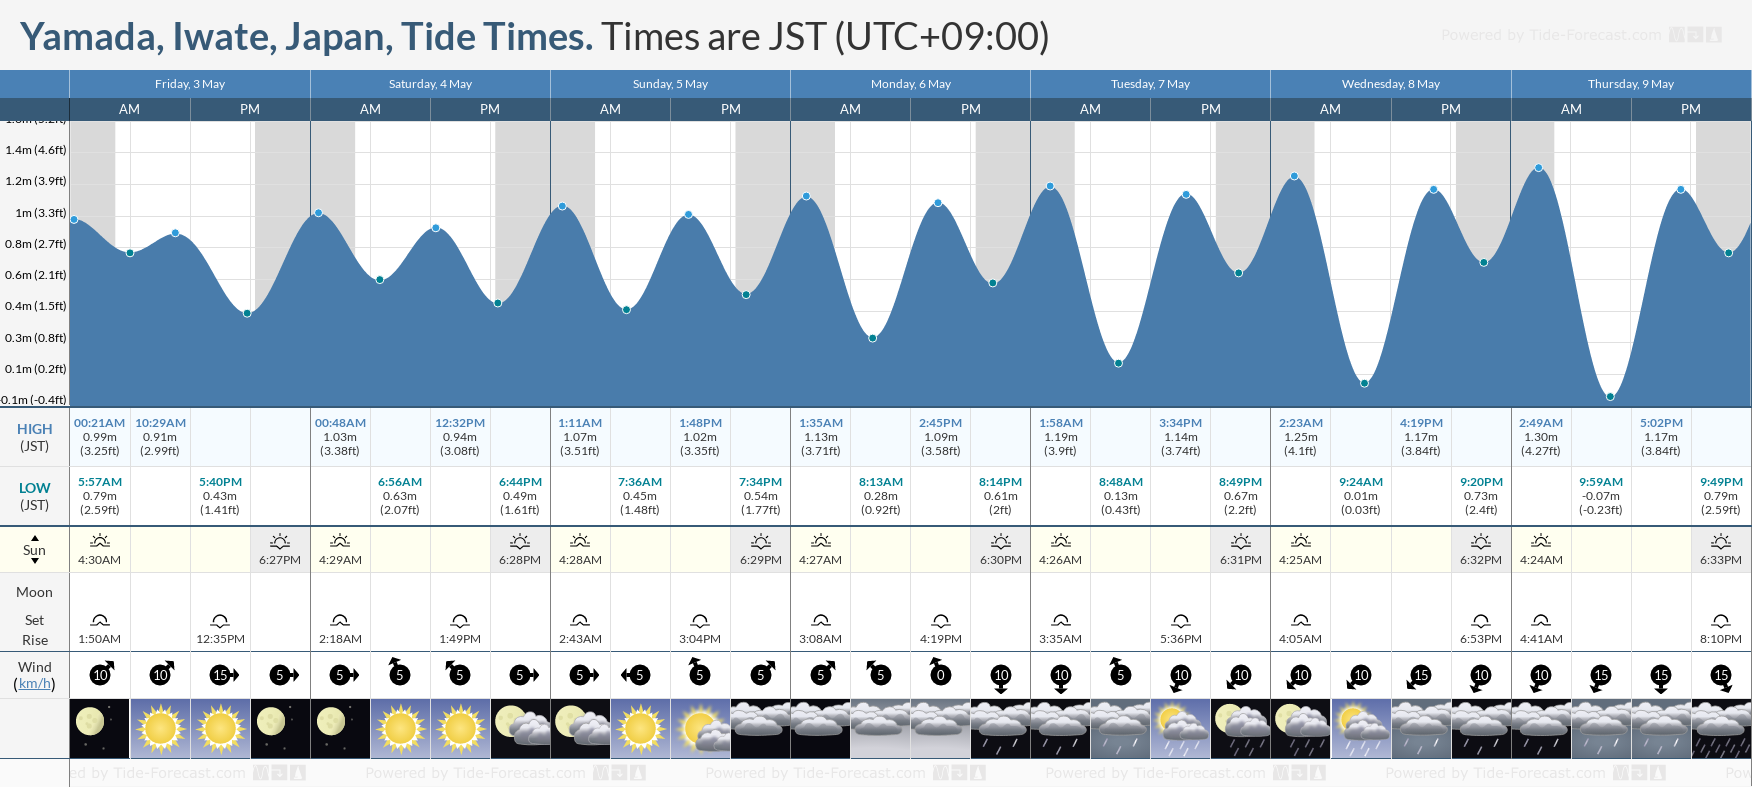 Yamada, Iwate, Japan Tide Chart including high and low tide times for the next 7 days